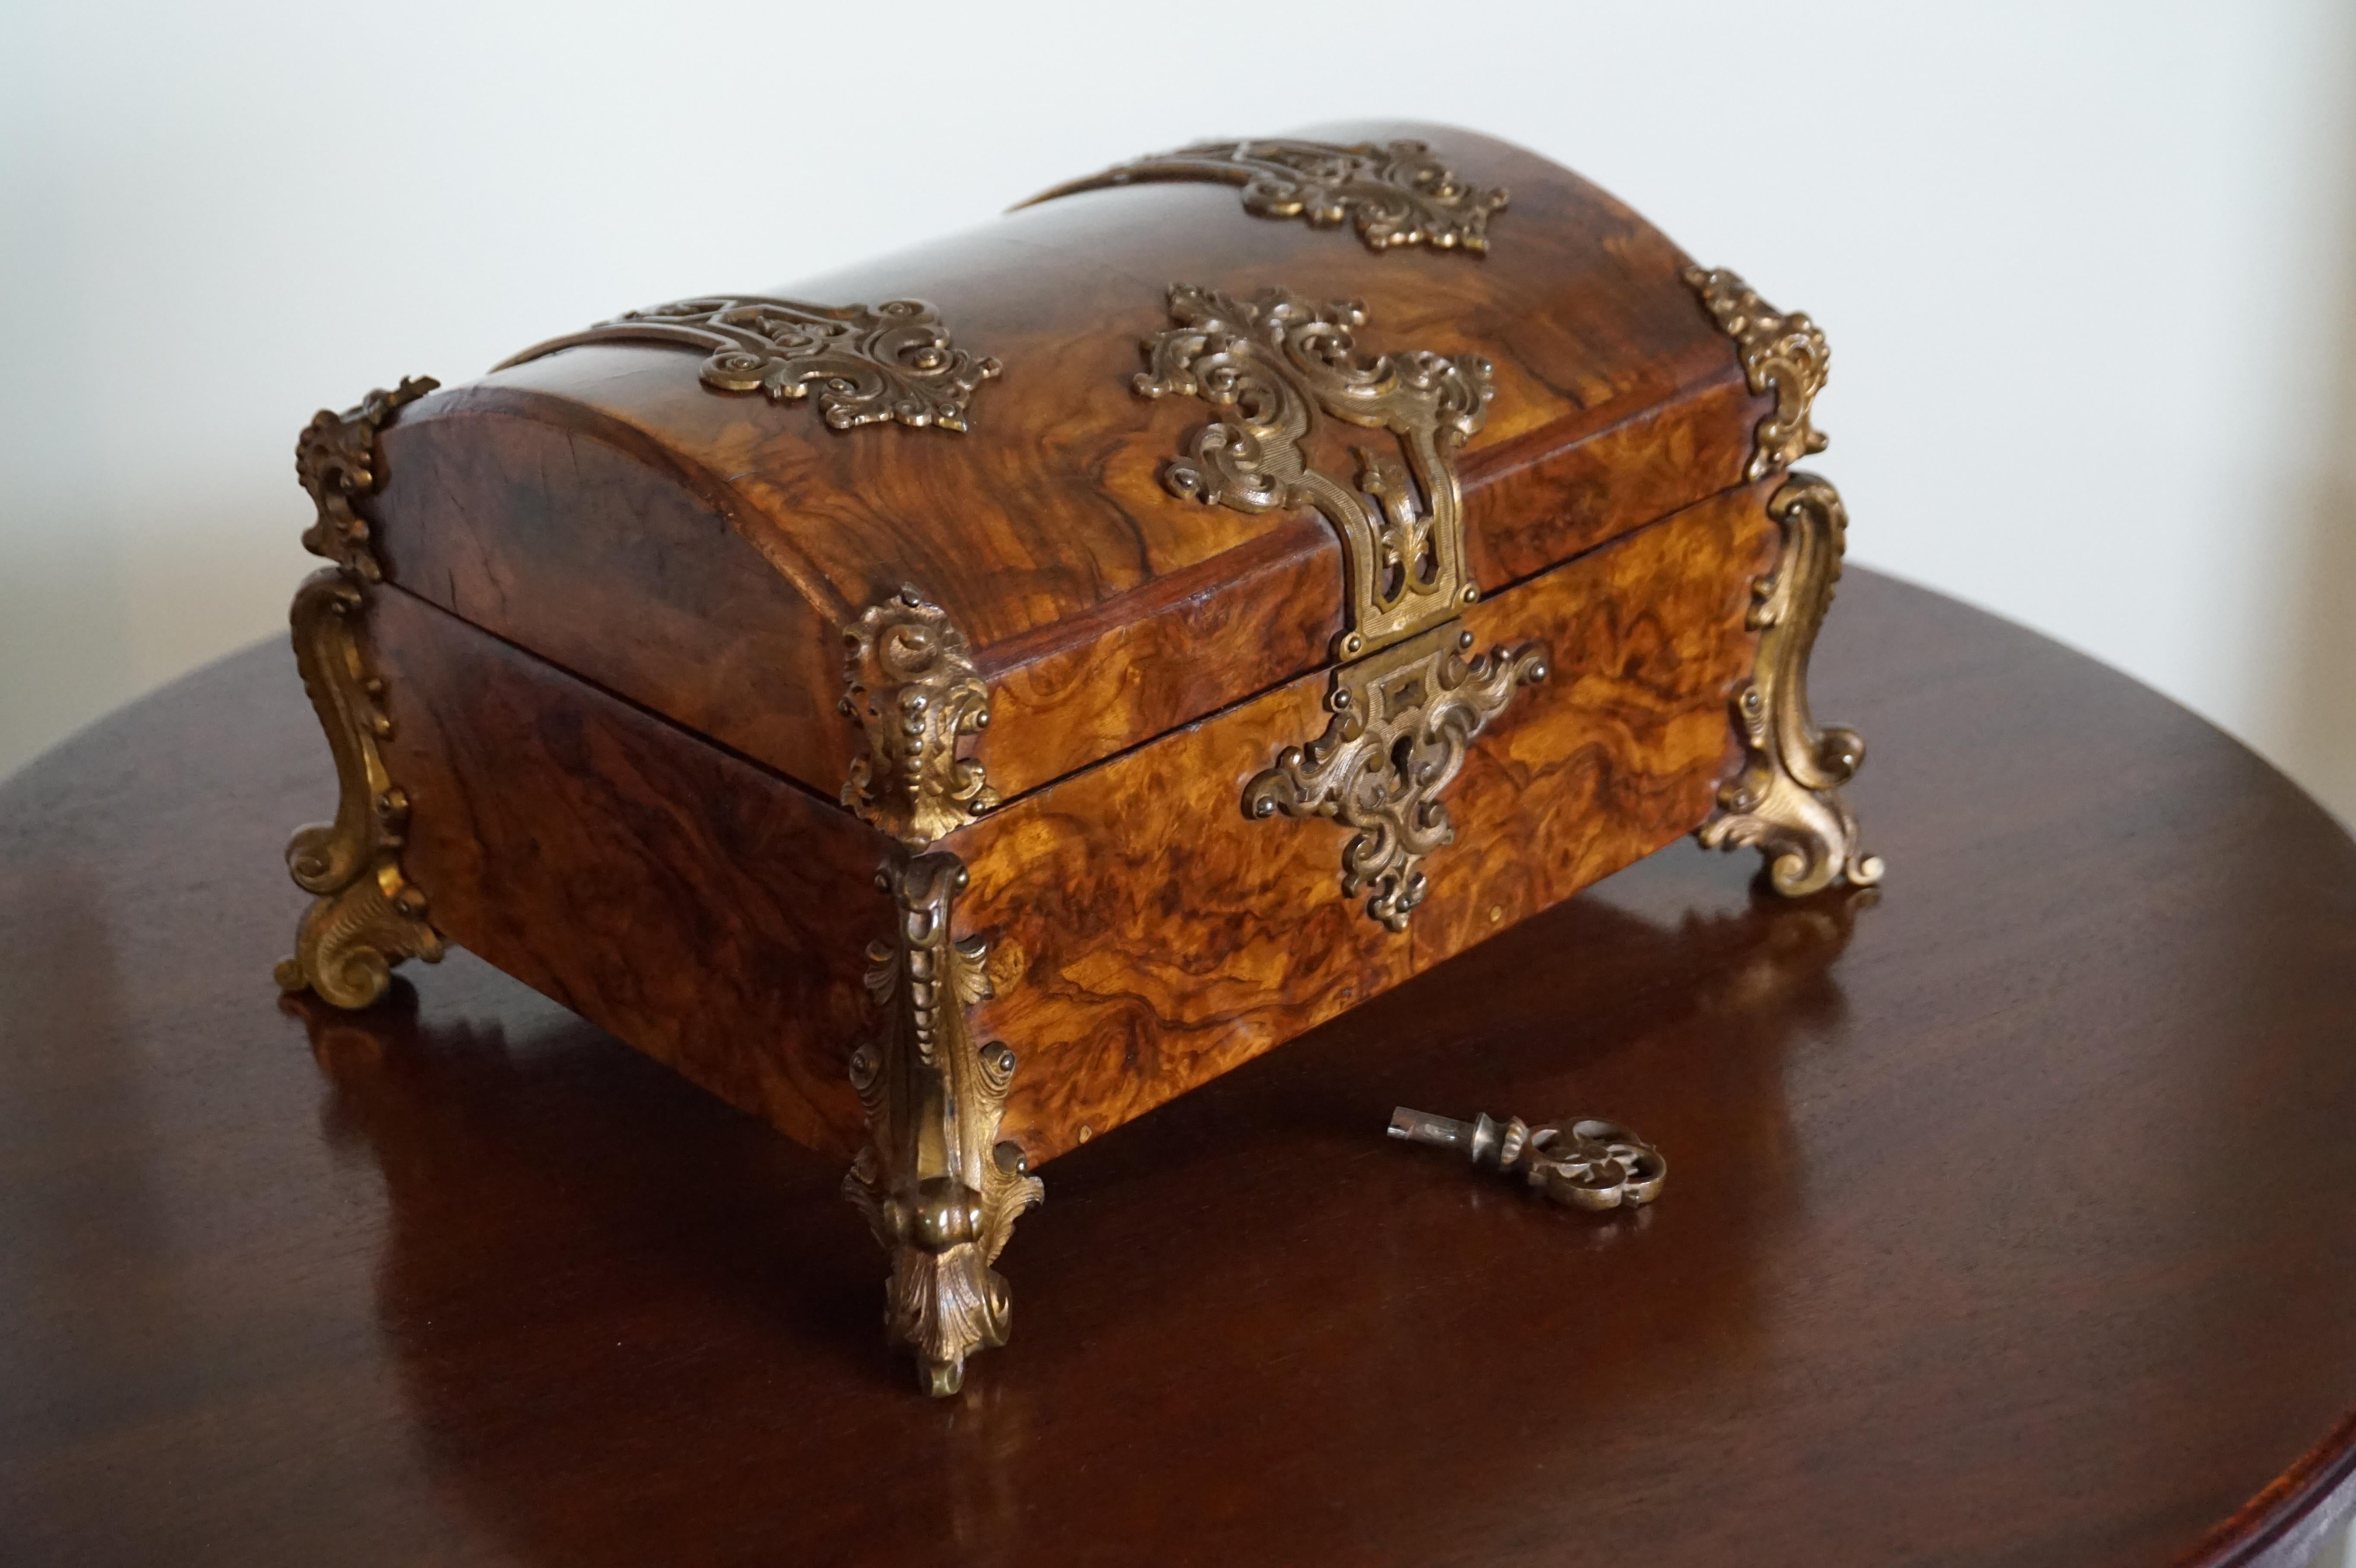 Top quality and excellent condition antique box for the connoisseurs.

Over the years we have had the pleasure of owning and selling some truly beautiful antique boxes and this handcrafted jewelry box is right up there with the best. The burl walnut